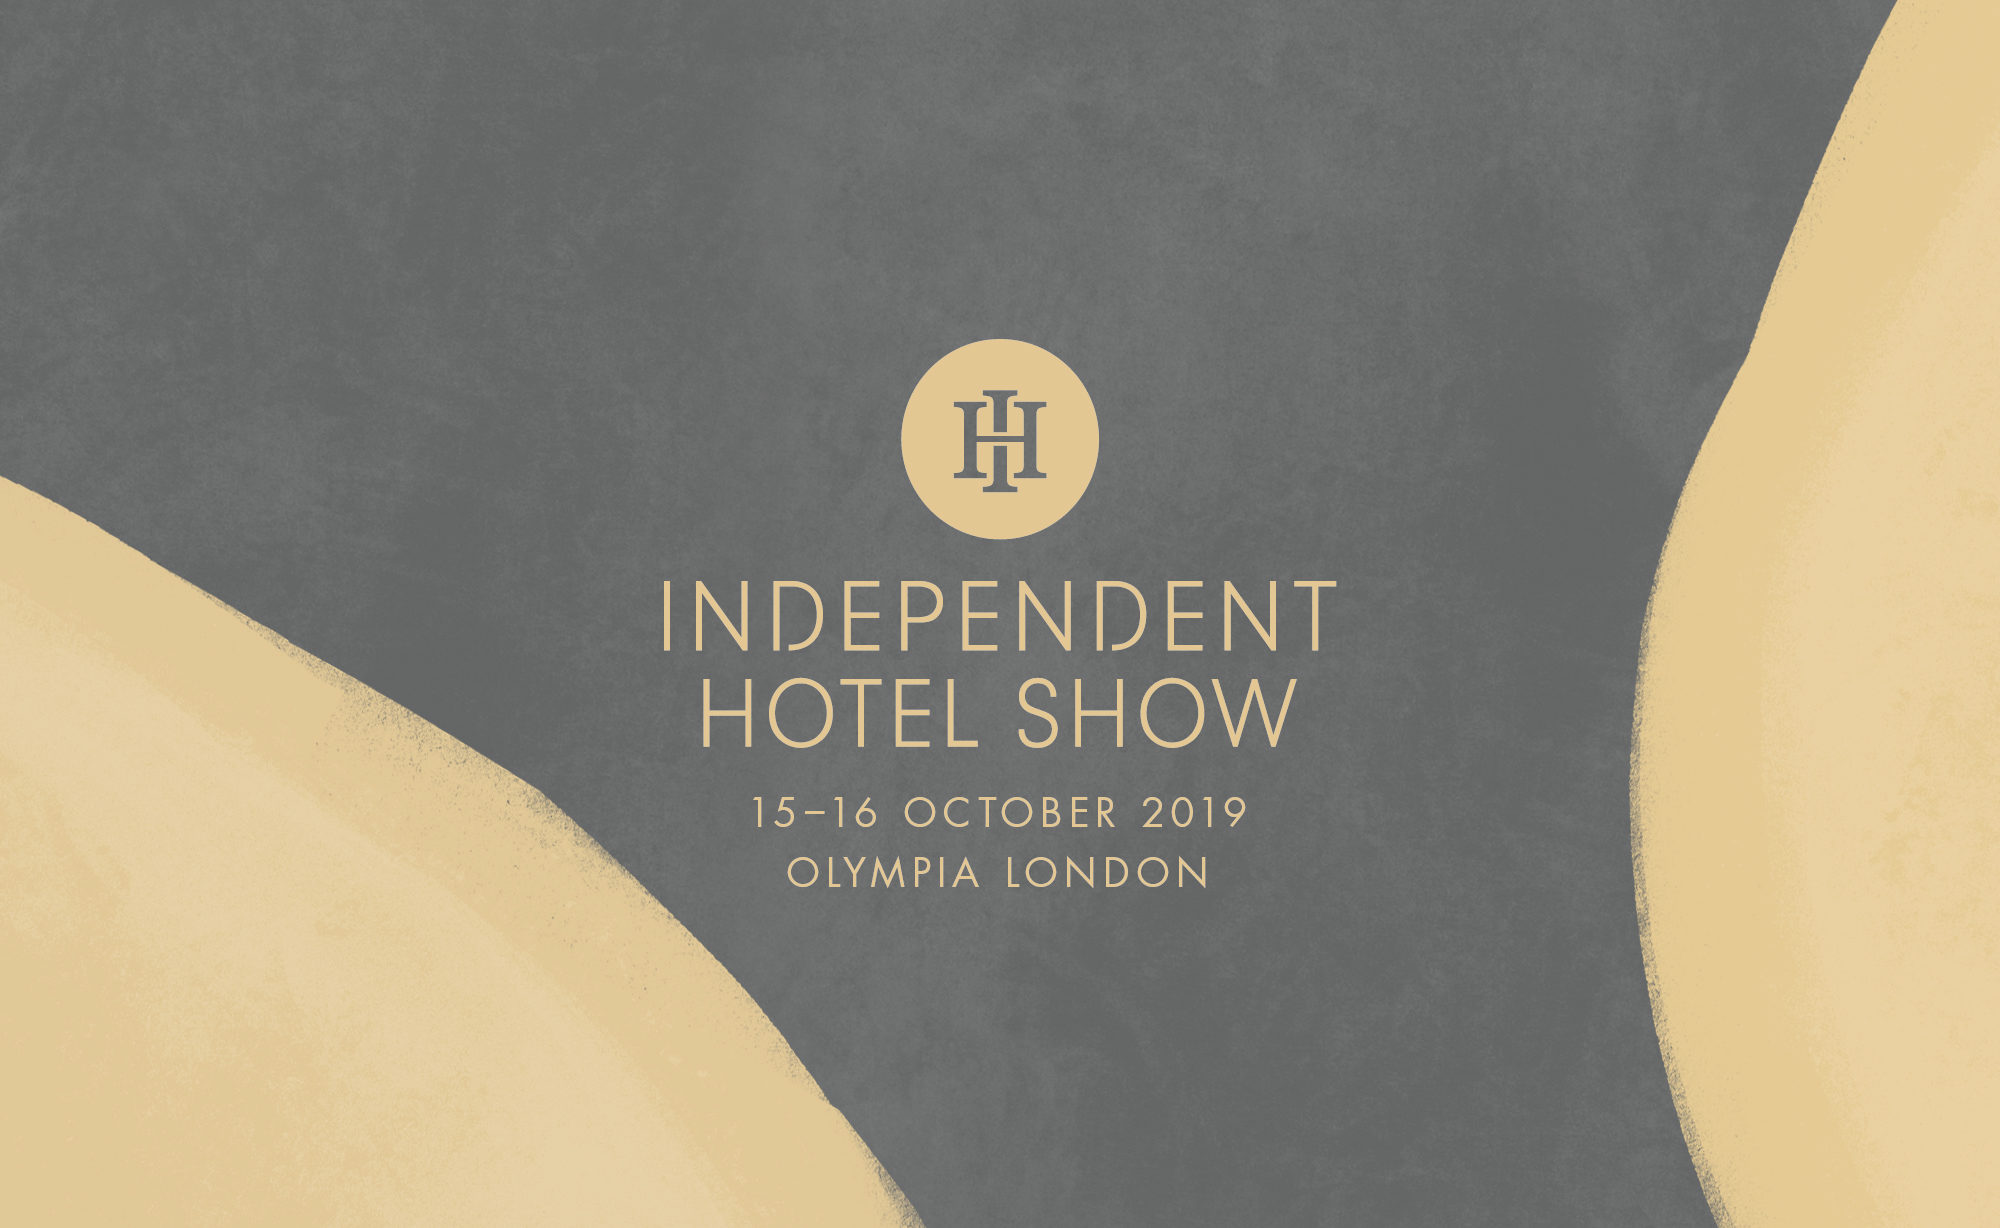 Independent Hotel Show logo overlaid onto grey and gold Giftpro texture backgrounds